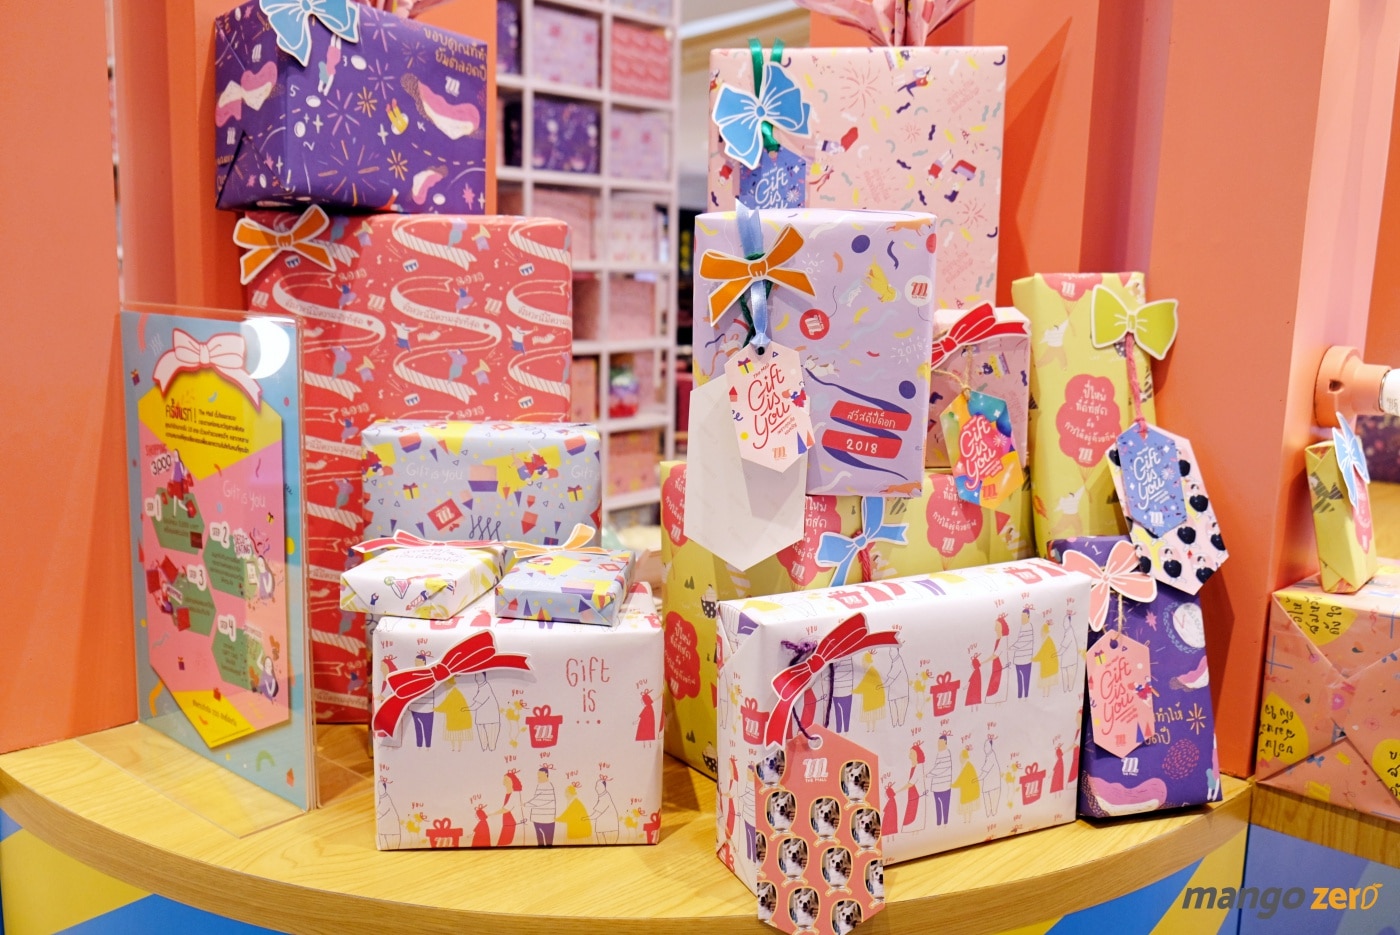 gift-wrapping-paragon-emporium-the-mall-11